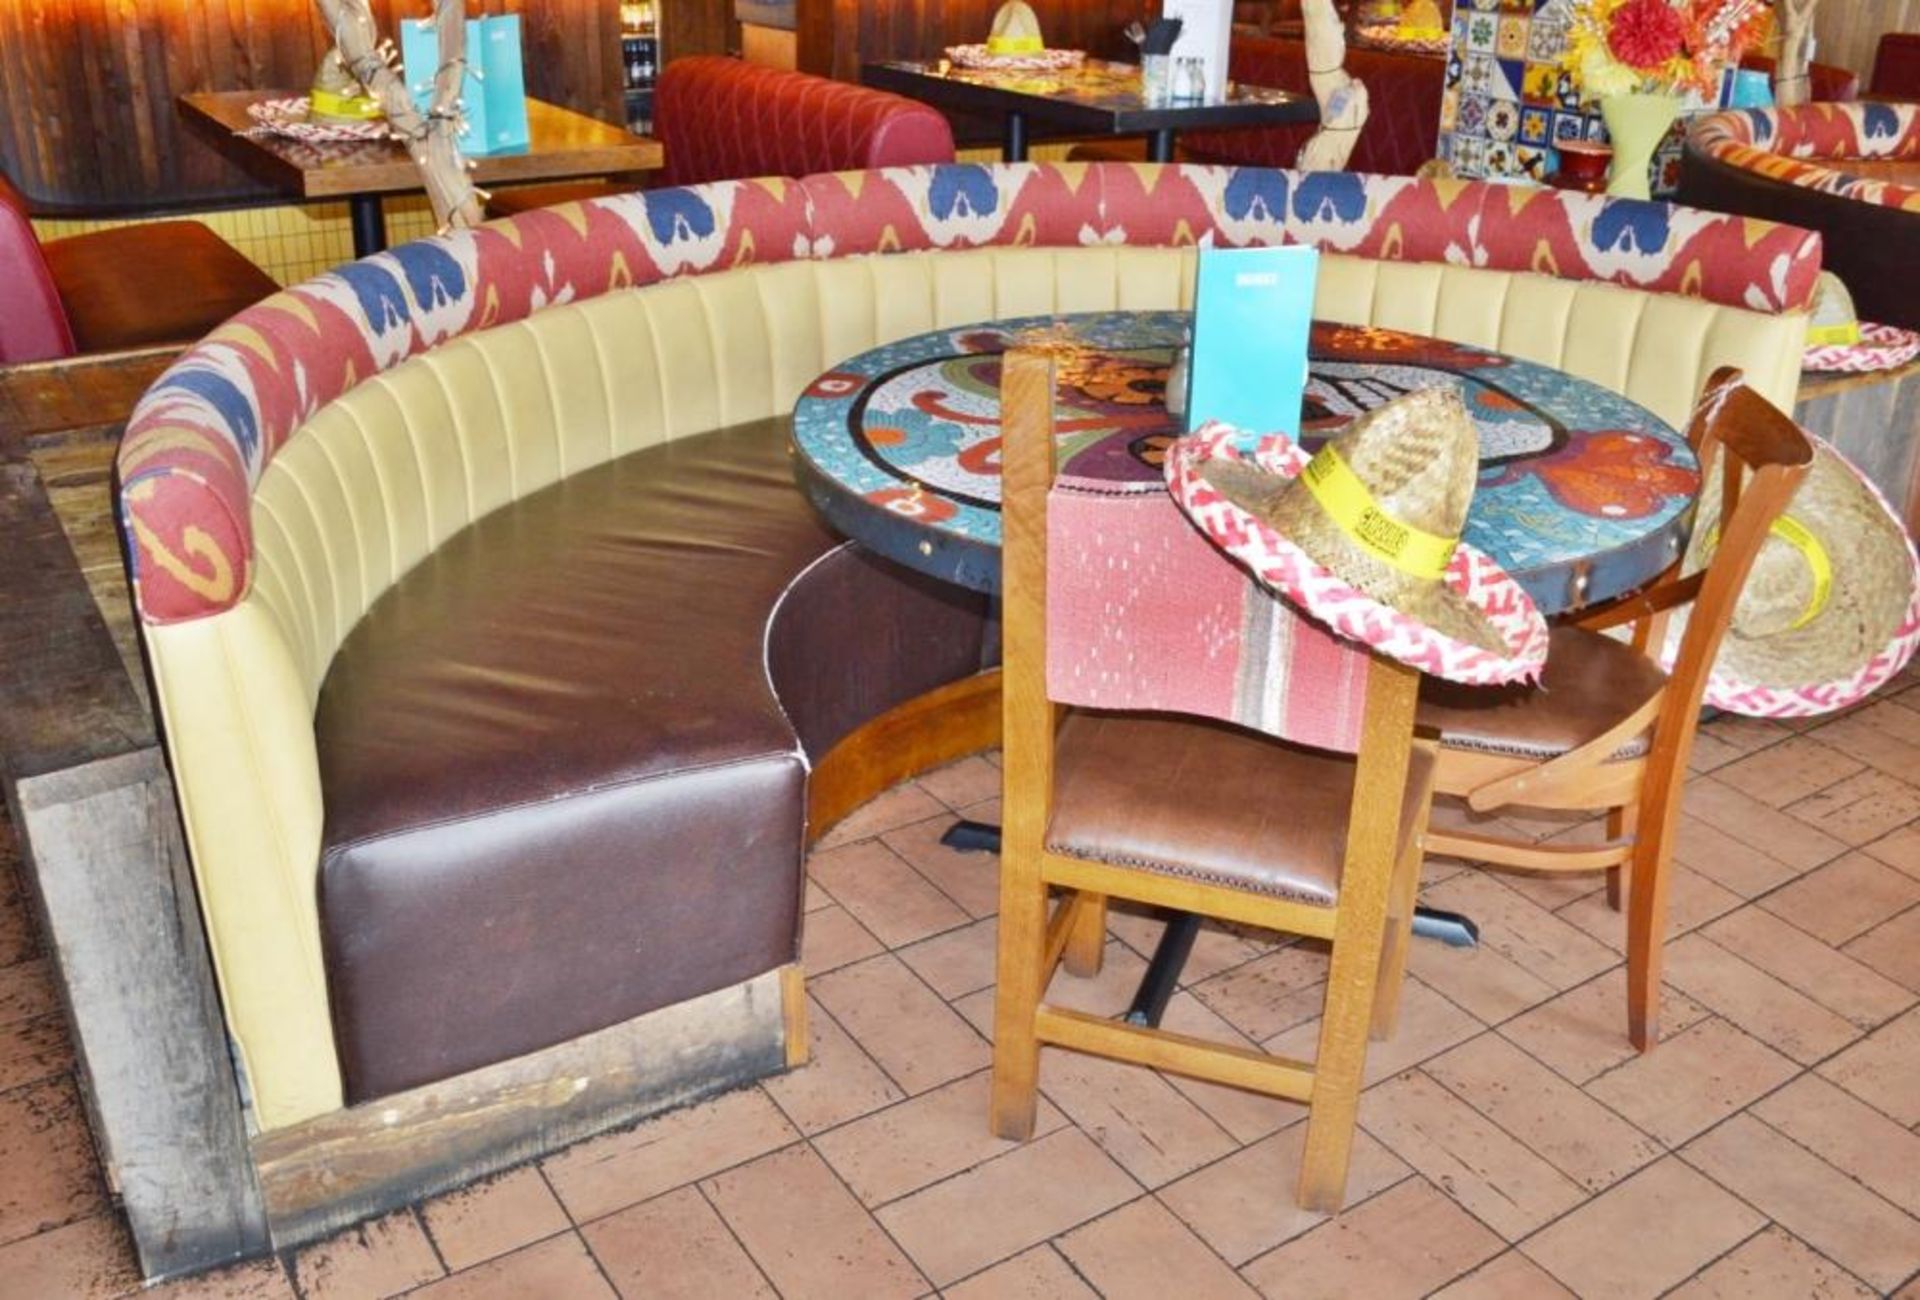 2 x Half Circle Seating Booths / Banquet Seating - Faux Leather Brown Seating With Yellow and Brown